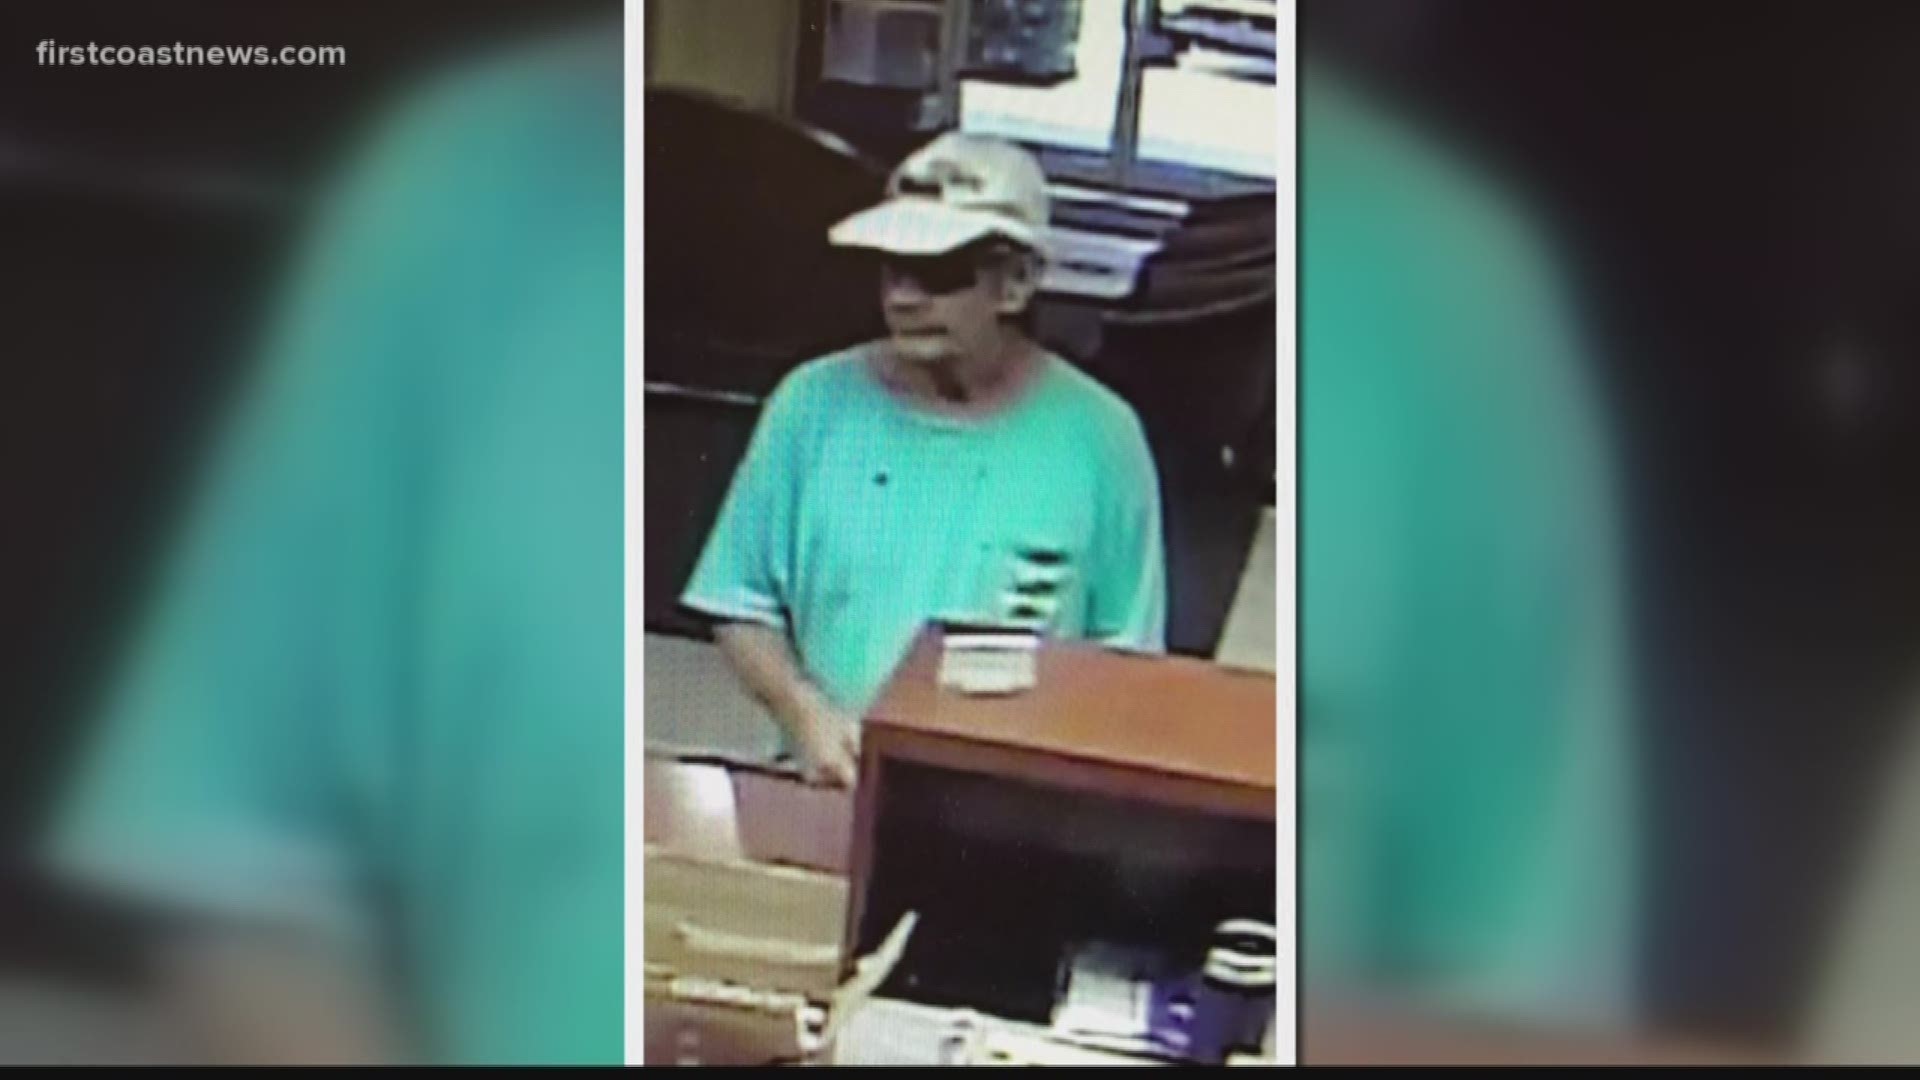 Deputies say a man went to the Ameris Bank on US-1 South around 12:30 p.m. They say he showed up with a black handgun and demanded money from the tellers.